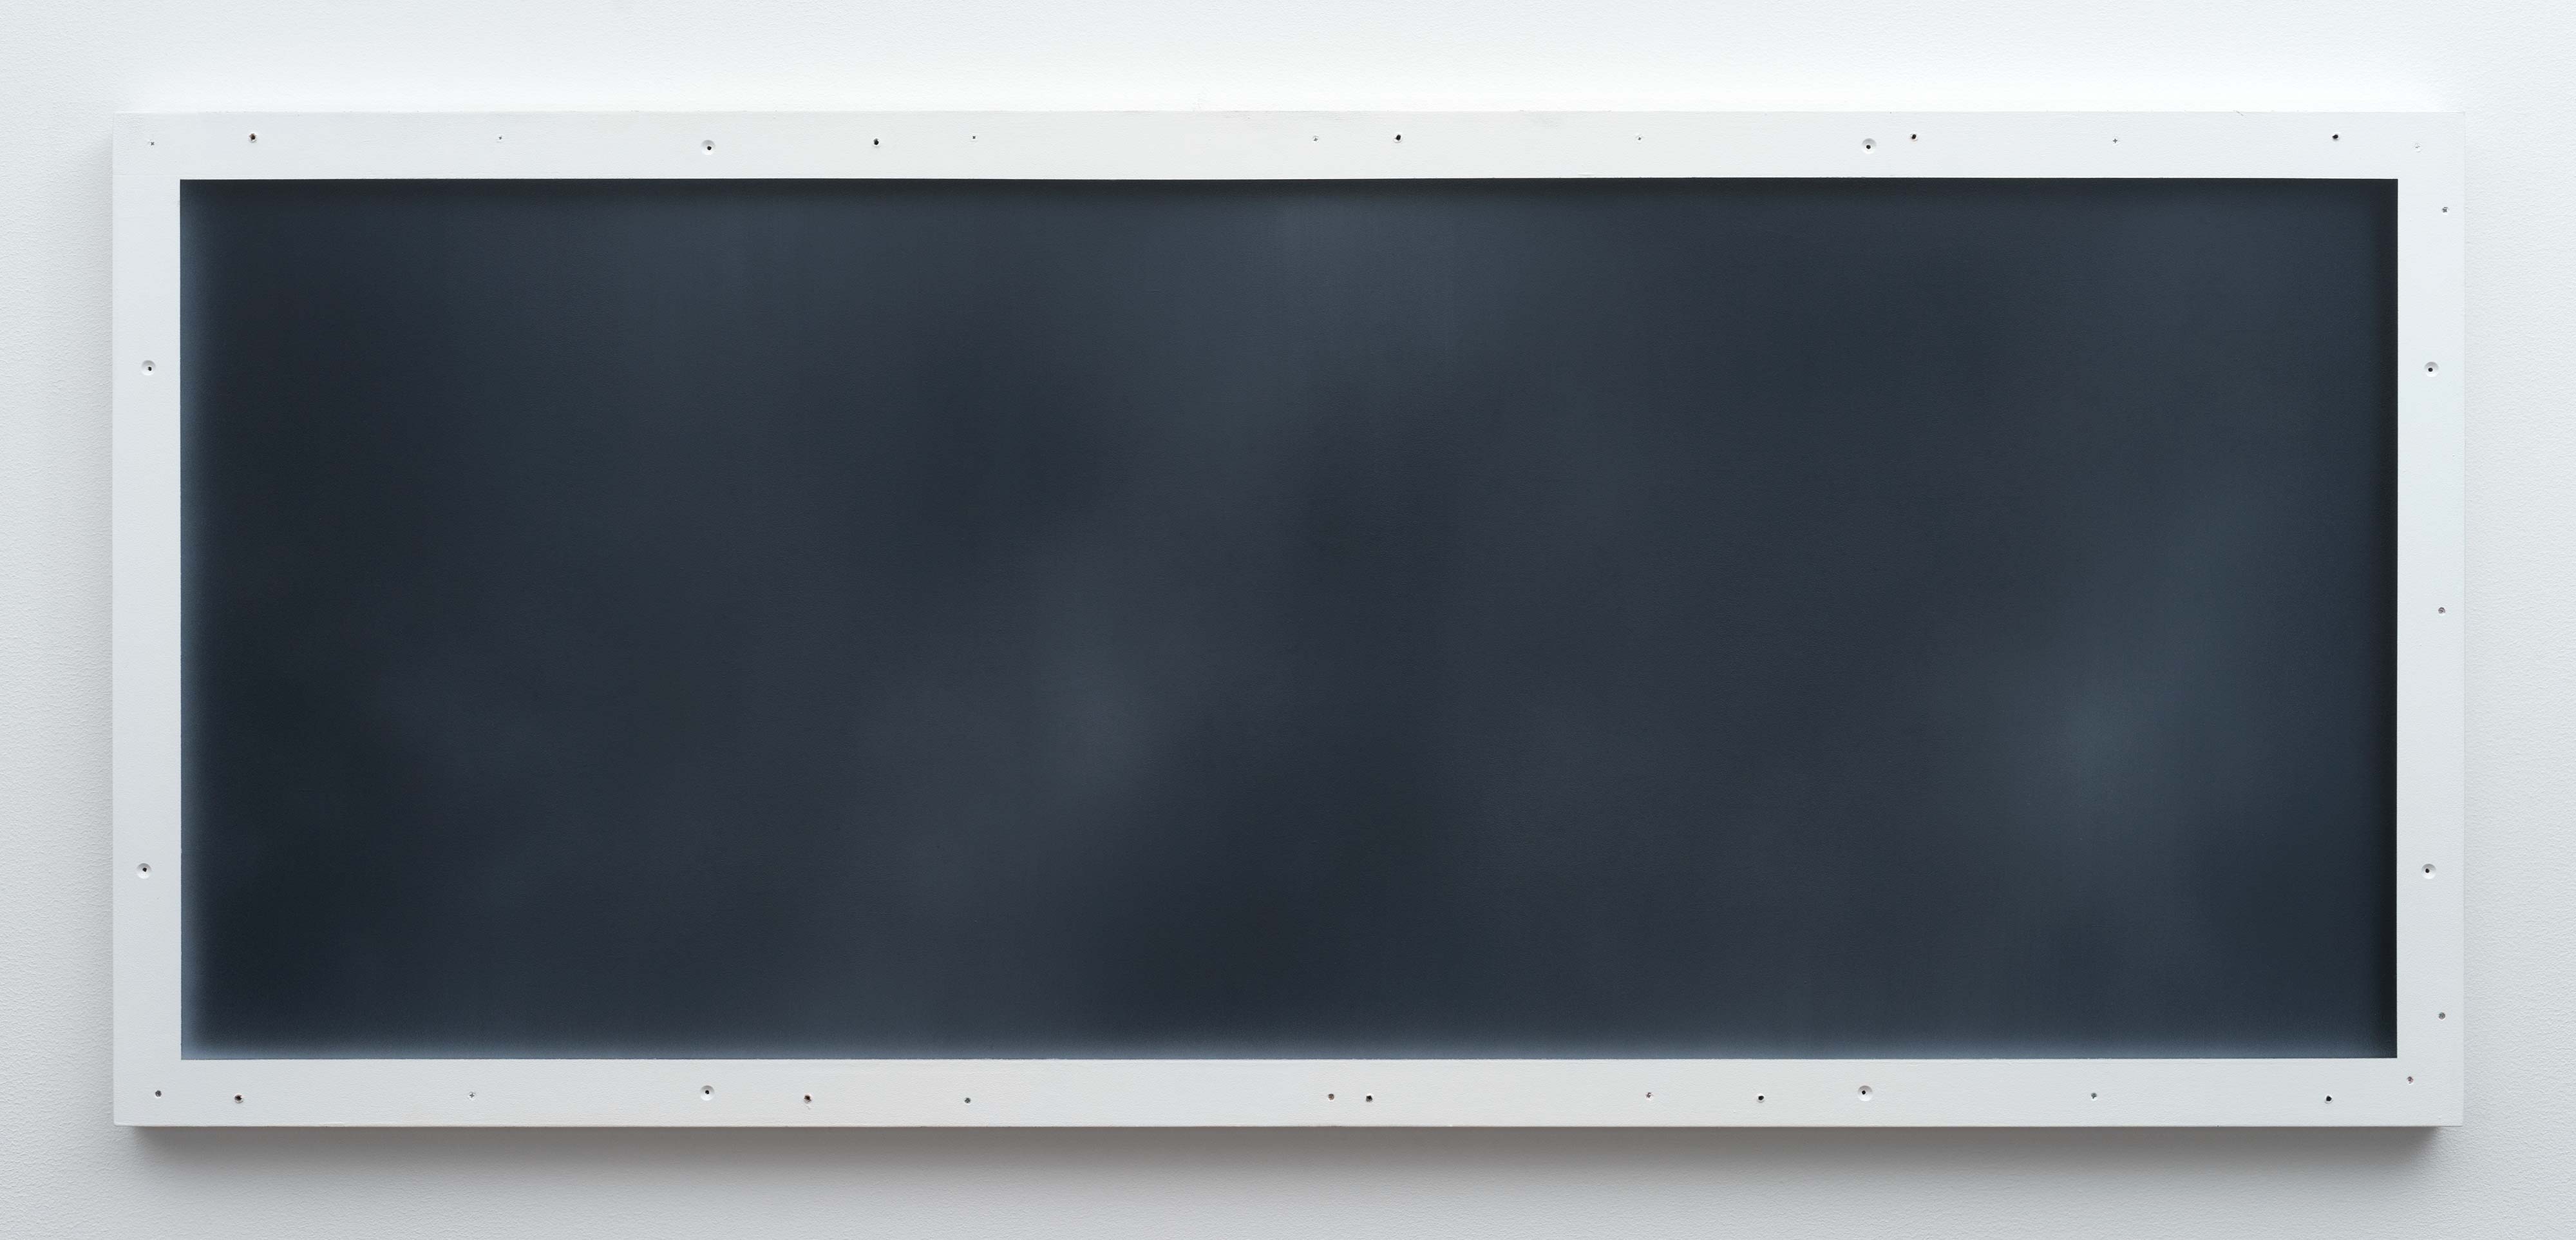 Christopher Page<br>Nocturne (II)<br>2016<br>Oil and acrylic on panel<br>23.6 x 54.3 in (60 x 138 cm)